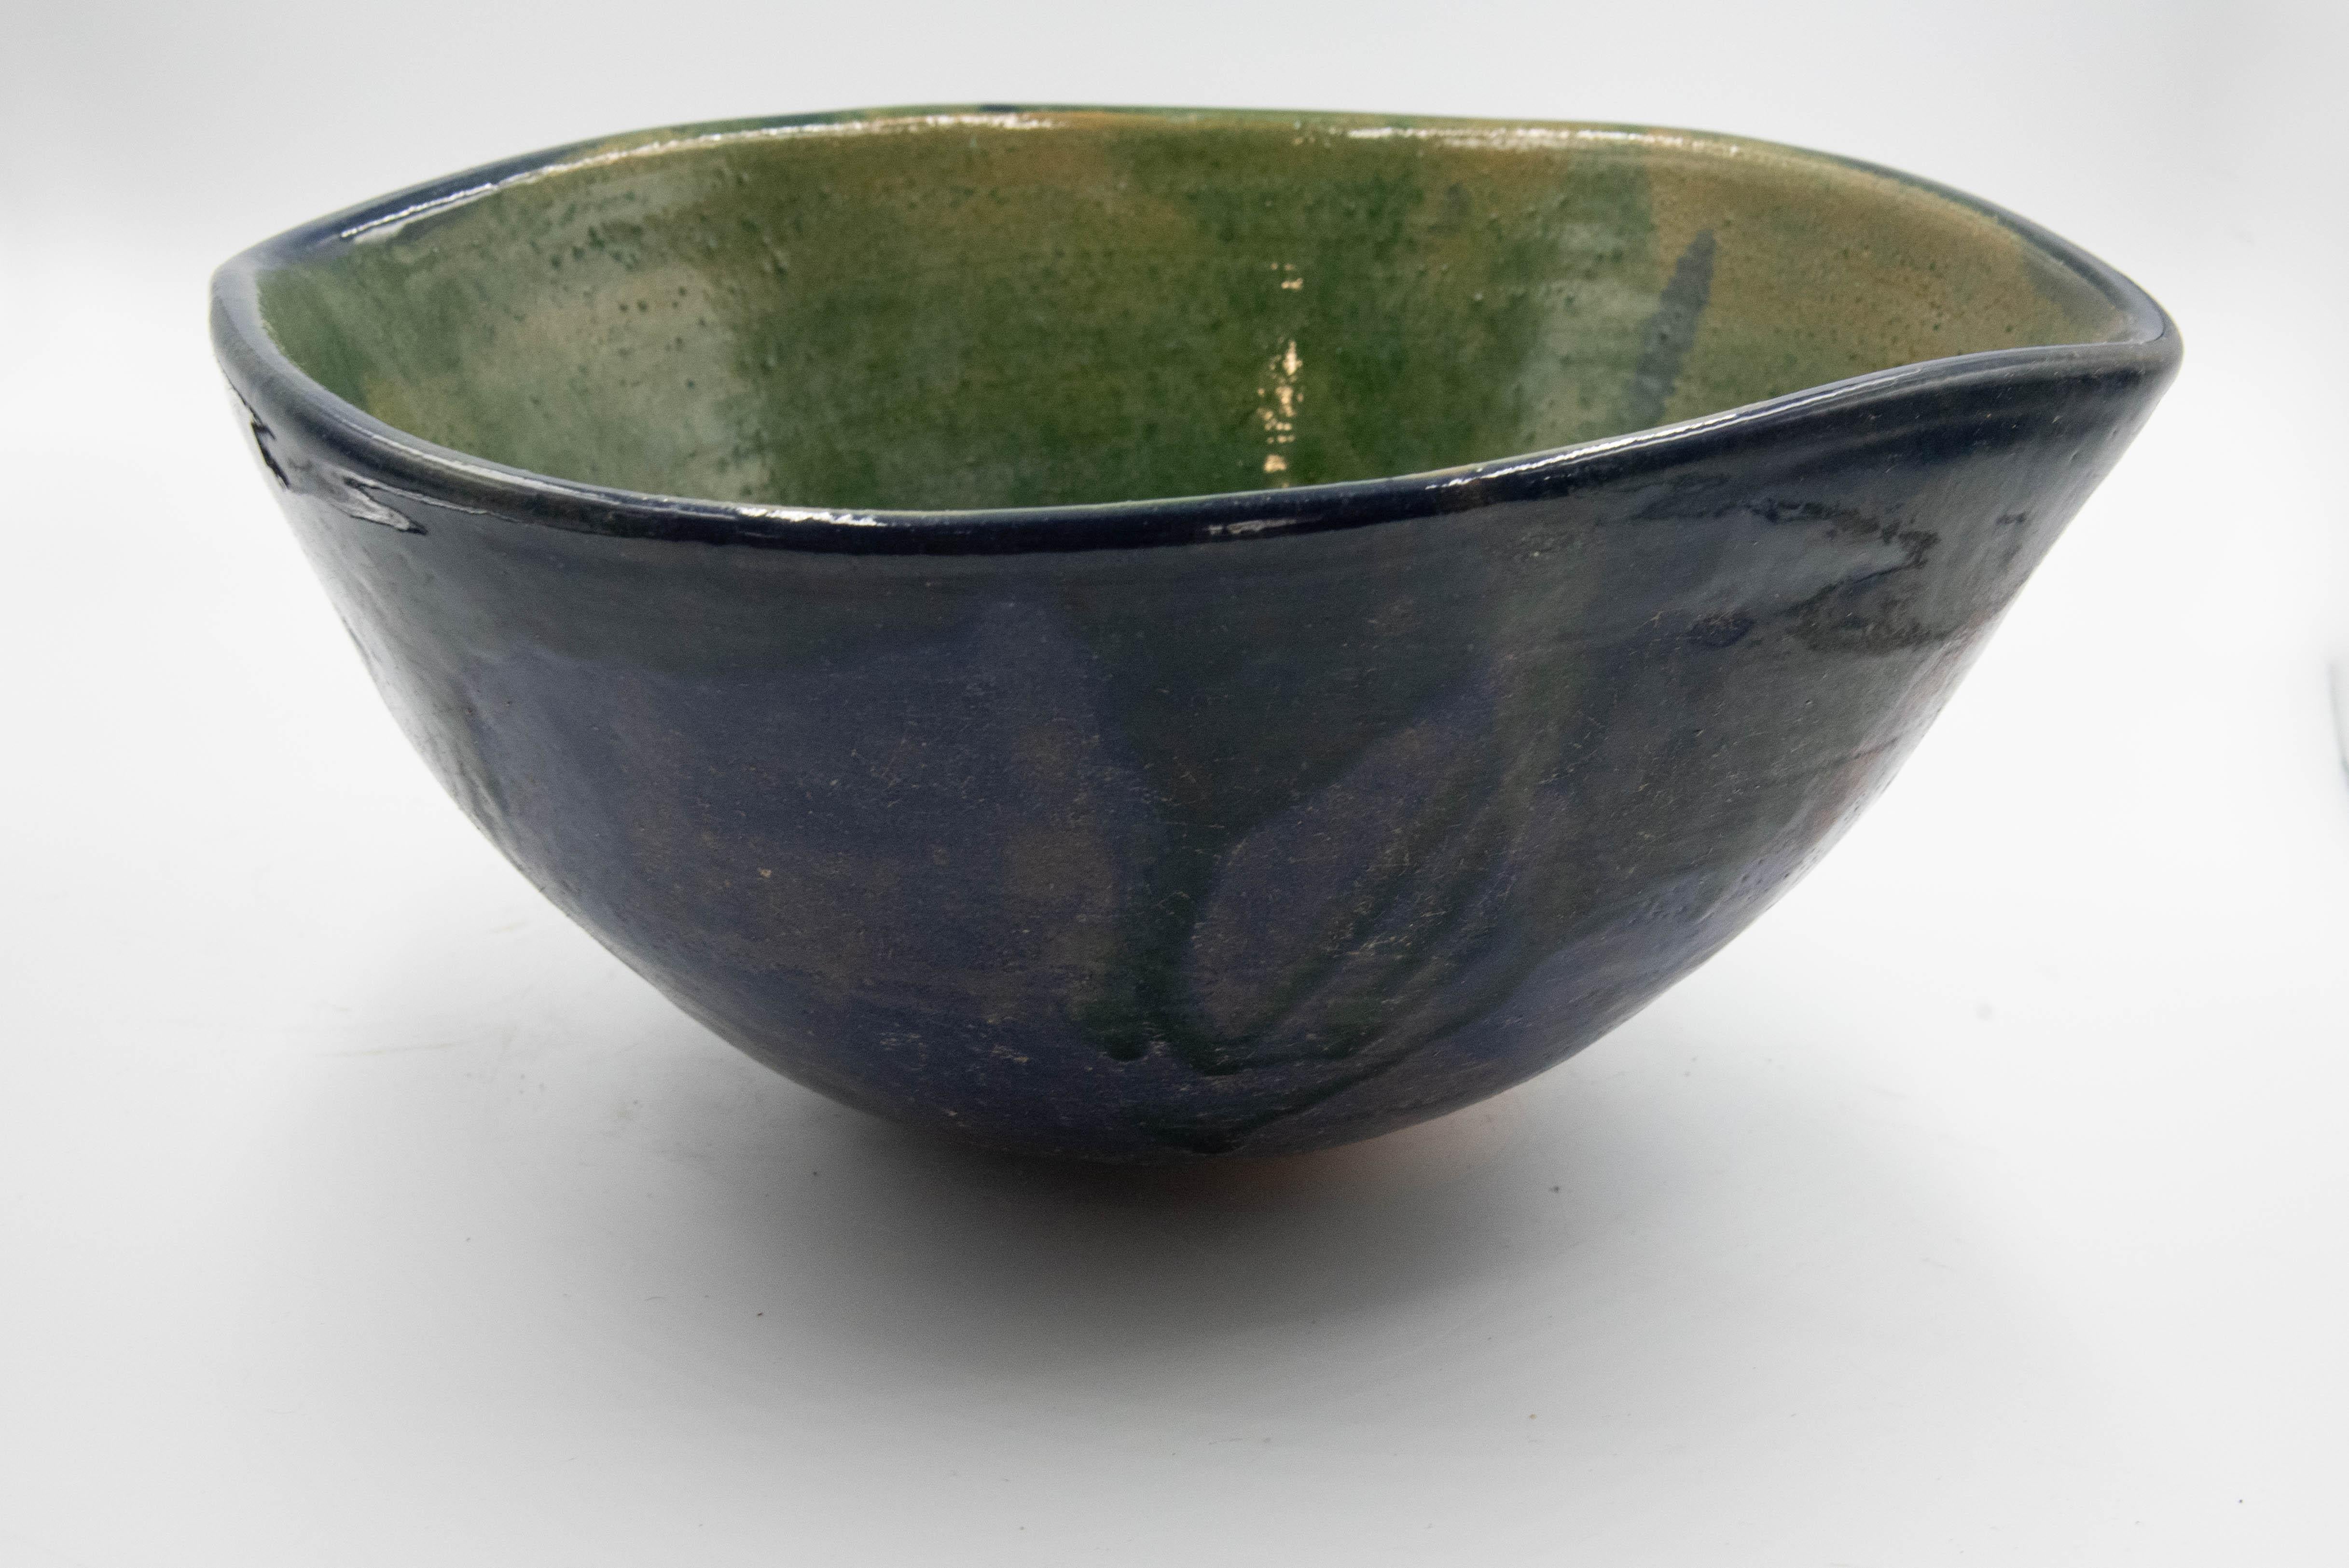 This beautiful rustic pottery bowl is made by Rolando Regino Porras, son of famous Mexican potter Dolores Porras, in Santa Maria Atzompa, in the state of Oaxaca, Mexico. 

Dolores made a great innovation by converting a utilitarian object at that